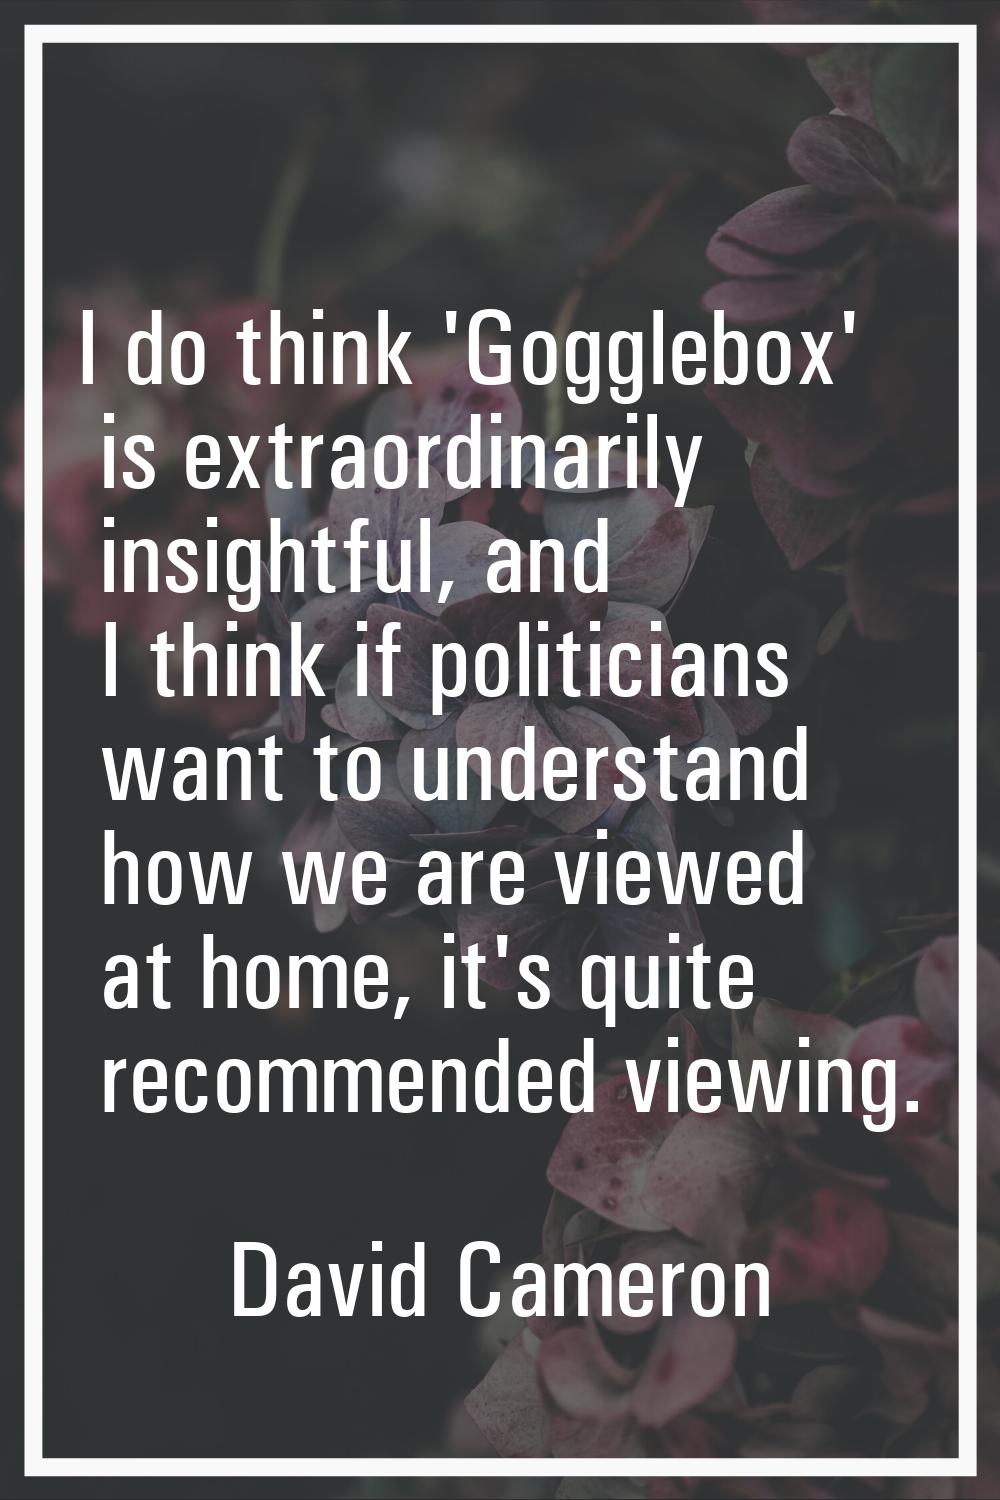 I do think 'Gogglebox' is extraordinarily insightful, and I think if politicians want to understand